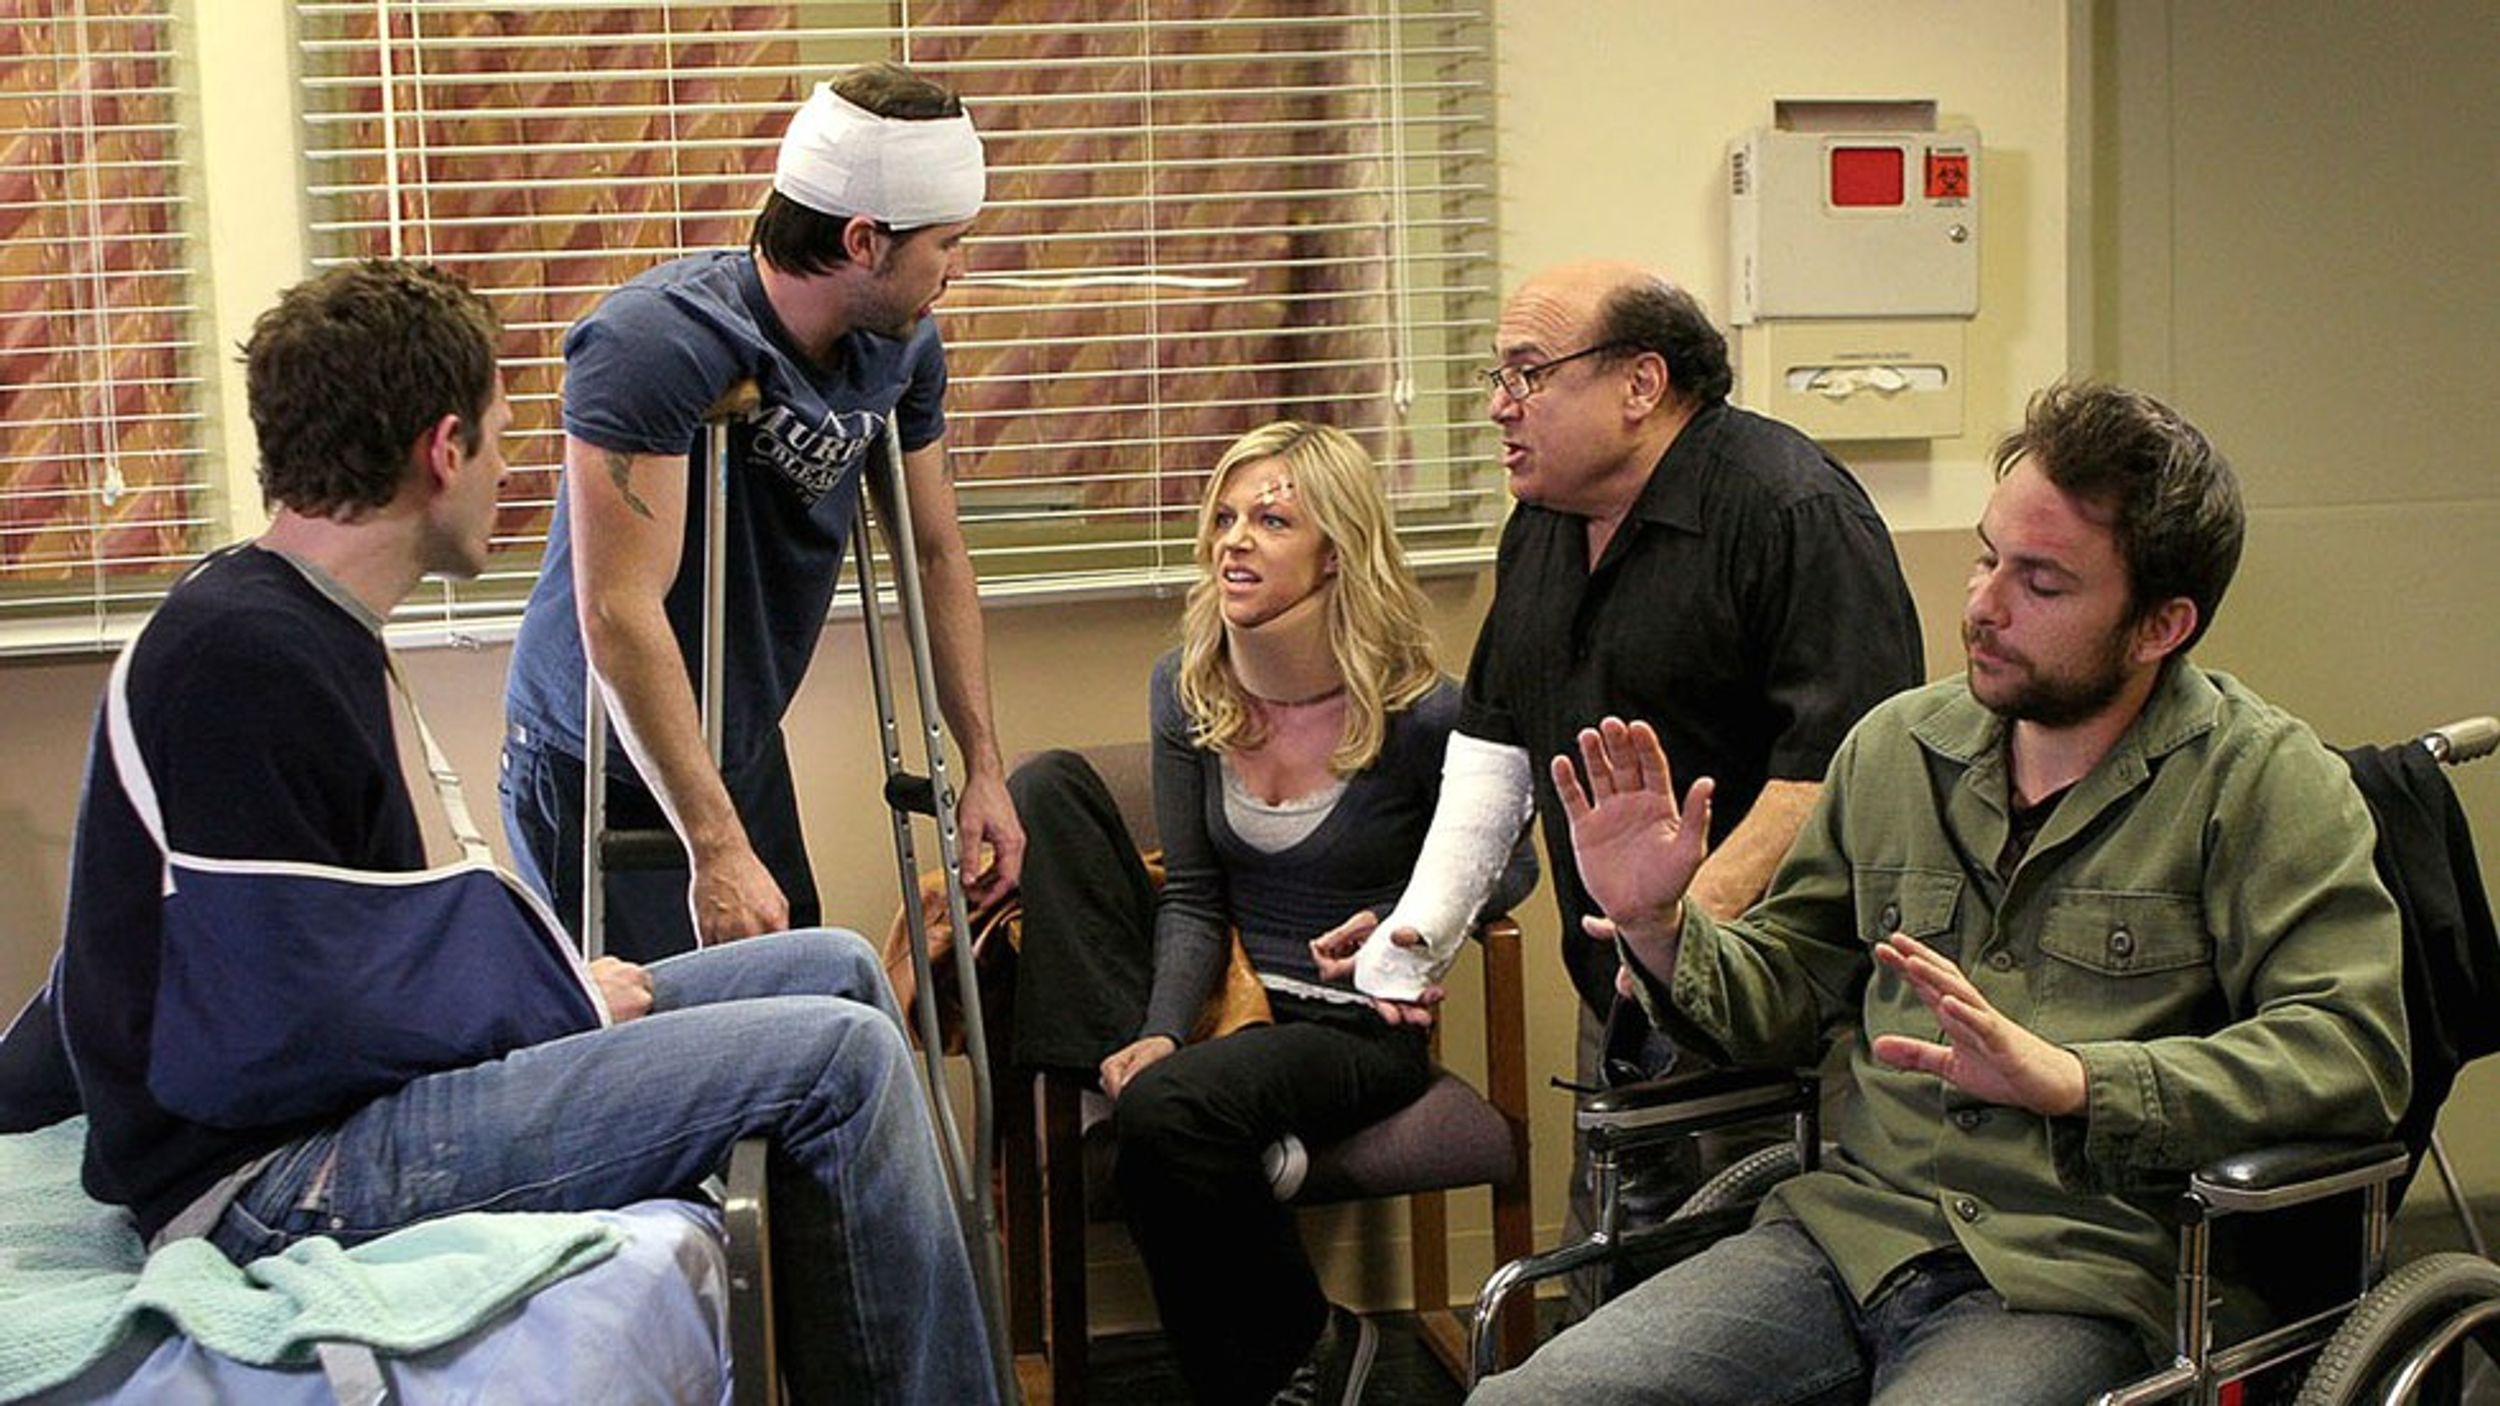 The Average College Week As Told By 'It's Always Sunny In Philadelphia'